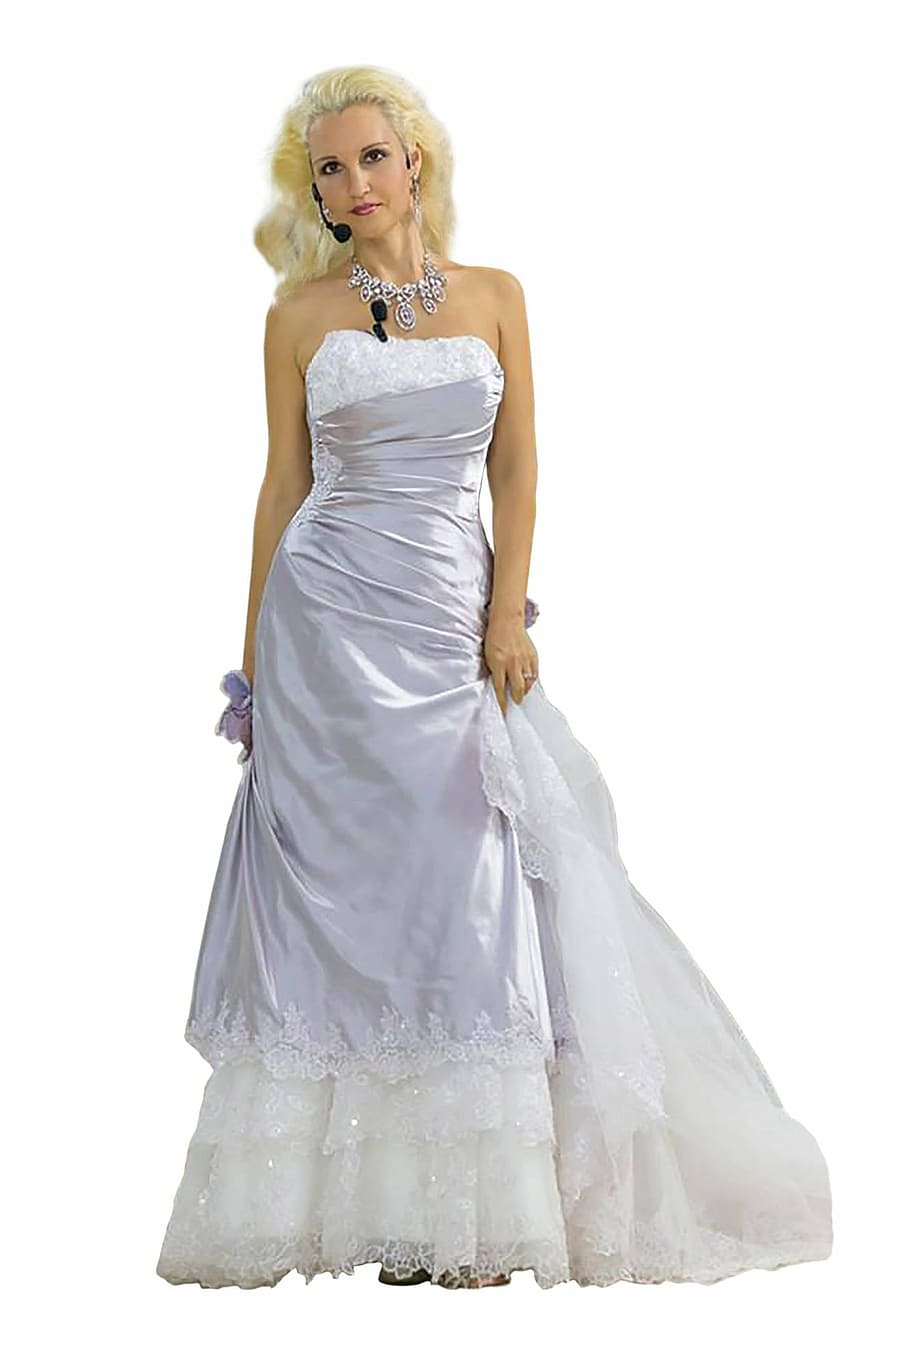 woman, wearing, white, strapless wedding gown, silver-colored necklace, dress, wedding dress, posture, training, coach